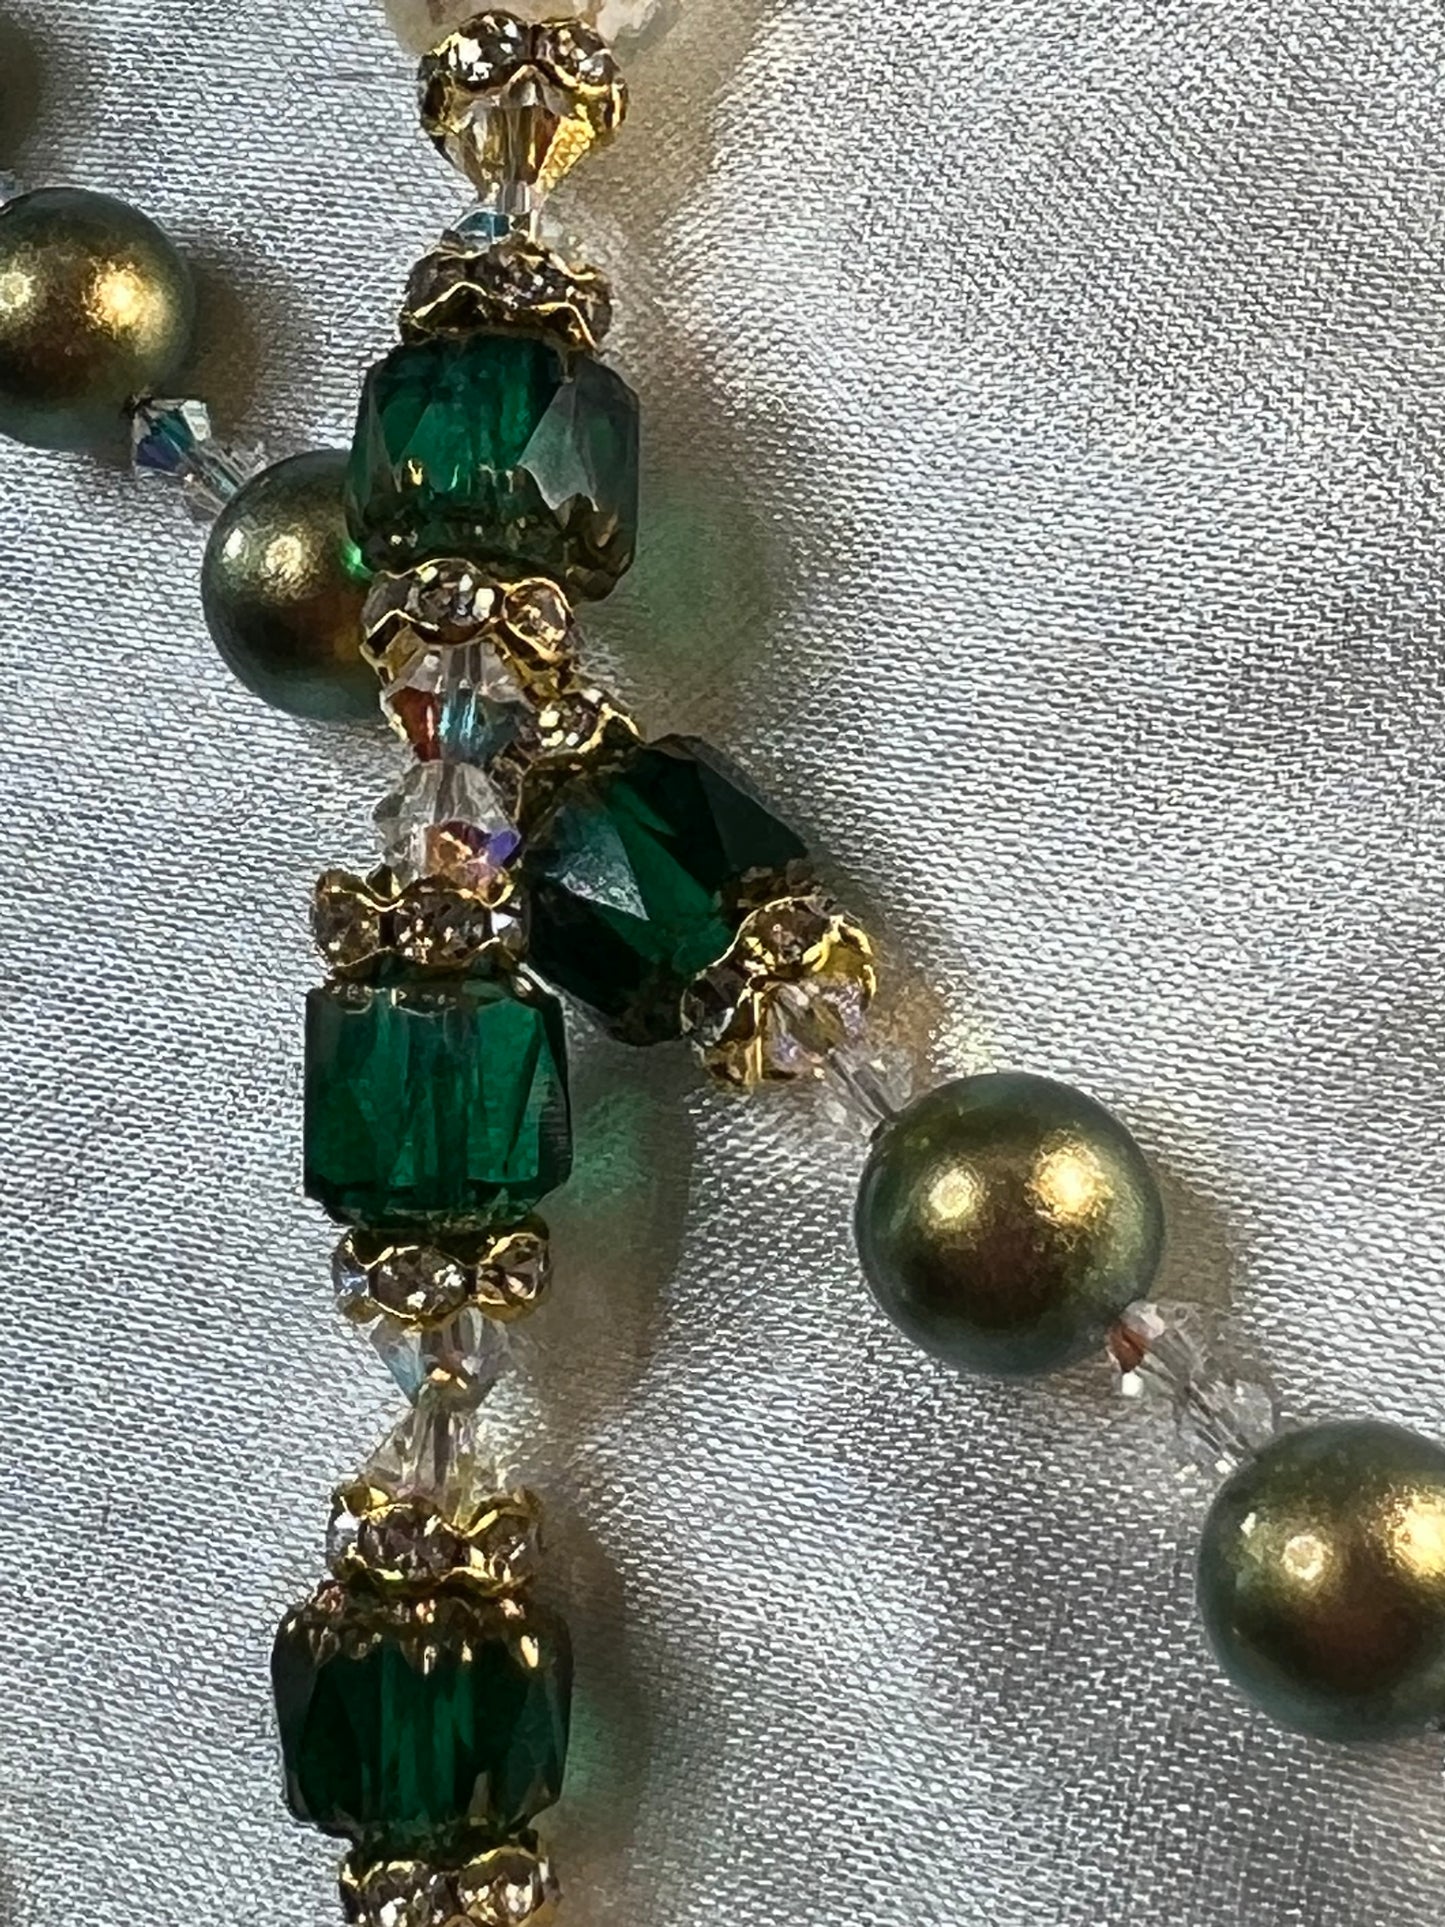 Iridescent Green Swarovski Pearls with Emerald Green Cathedral Pater beads & Swarovski Crystal spacers.